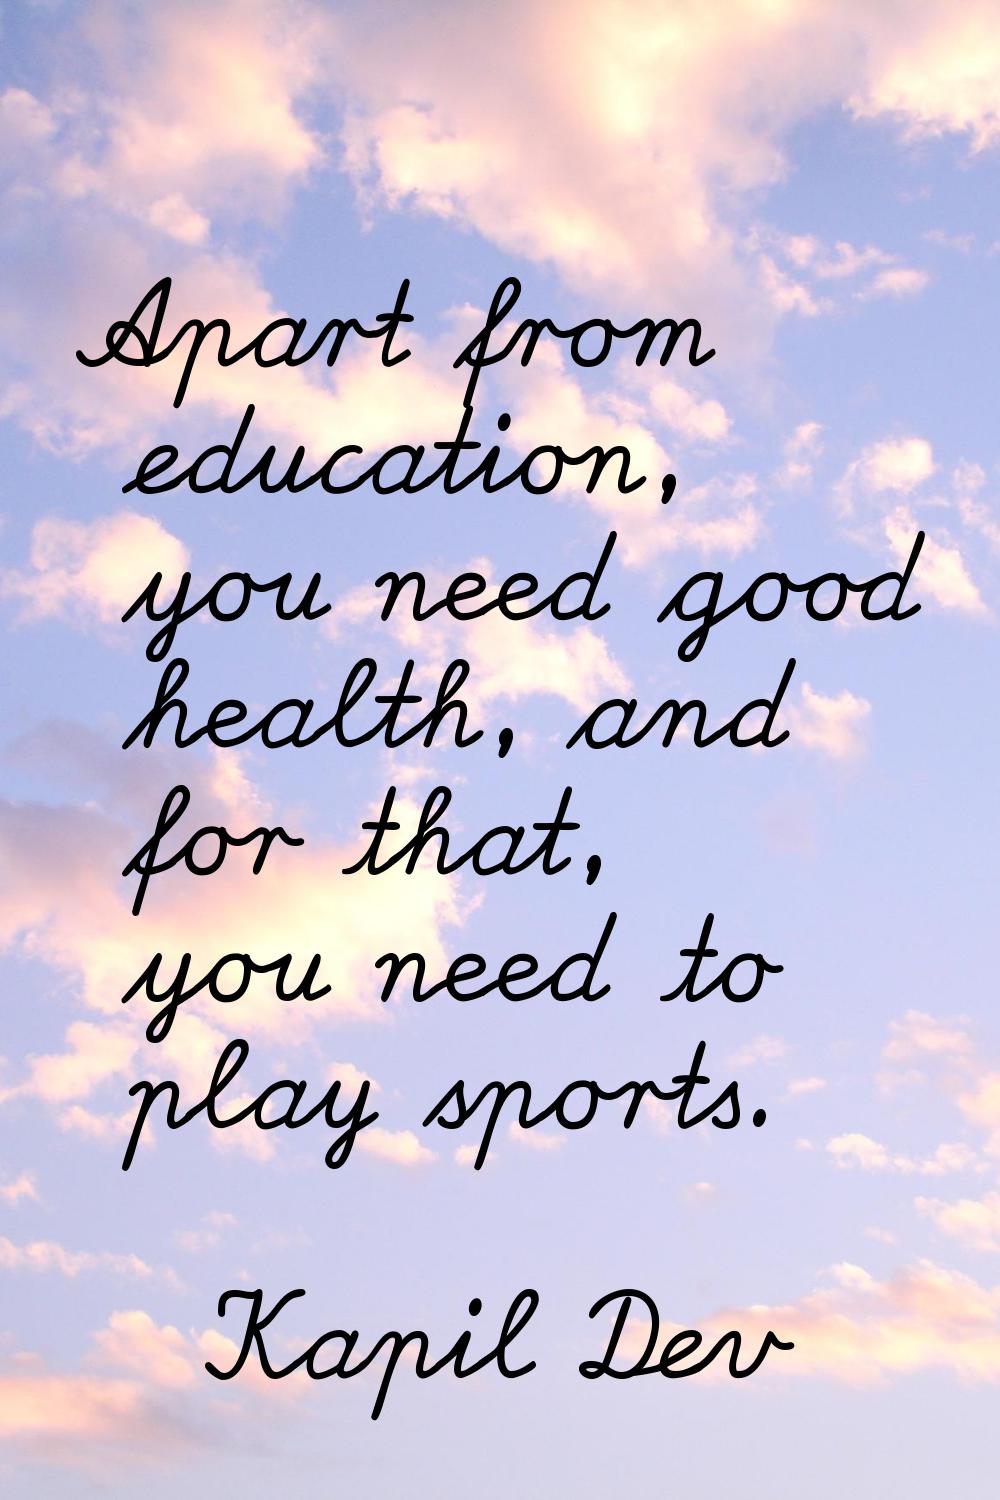 Apart from education, you need good health, and for that, you need to play sports.